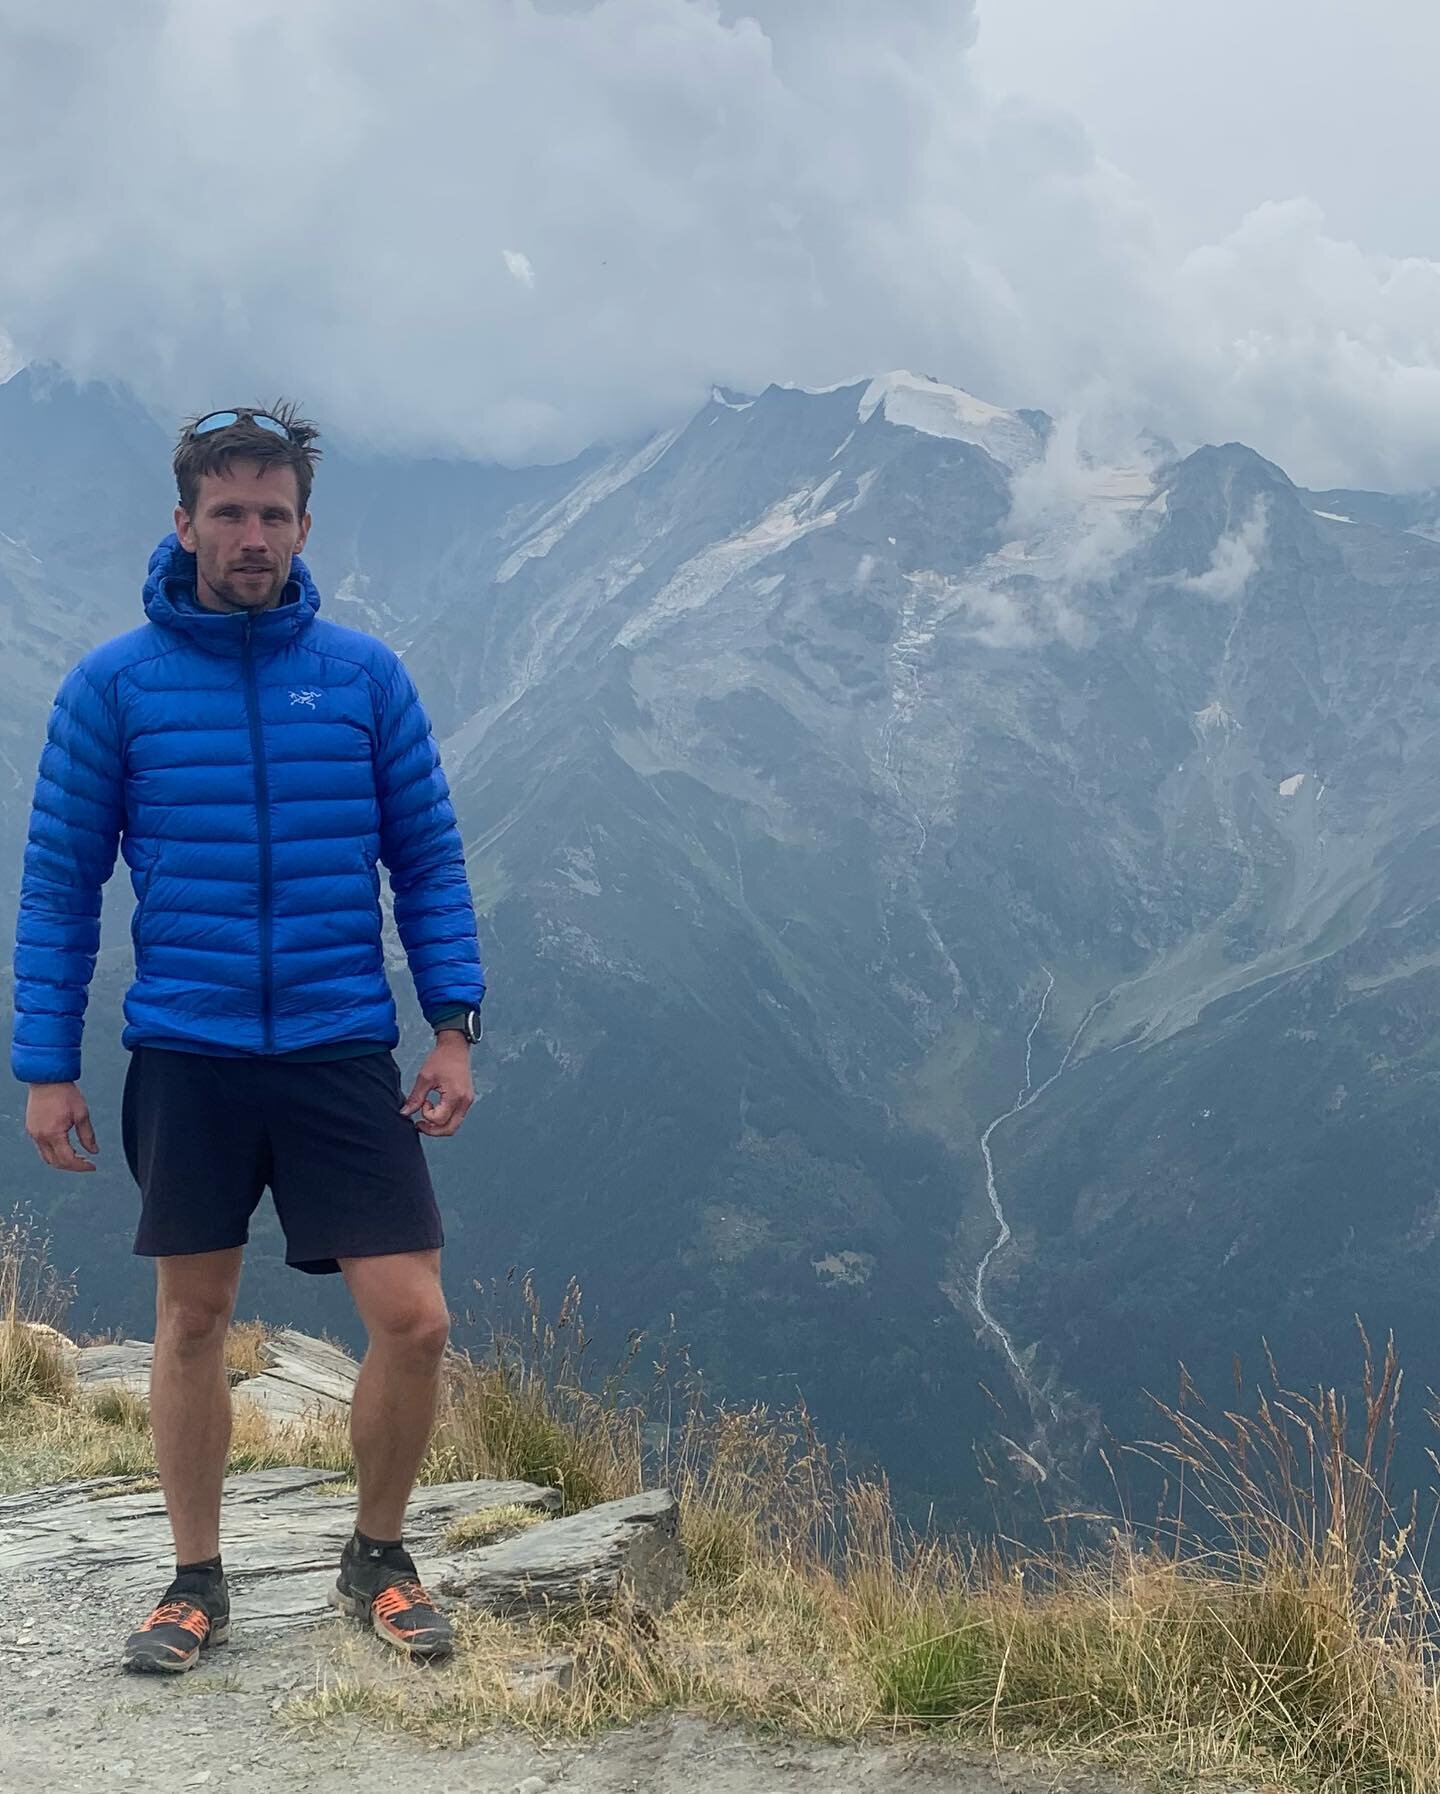 At the top of Mt Joly wearing my favourite blue @arcteryxuk jacket 😃👍
 
Less than 5 days till the @utmbmontblanc . Getting very excited! ⛰🏃🏼&zwj;♂️👍

The last photo was me at up top of Mt Joly three years ago in May with a lot more snow. It&rsqu